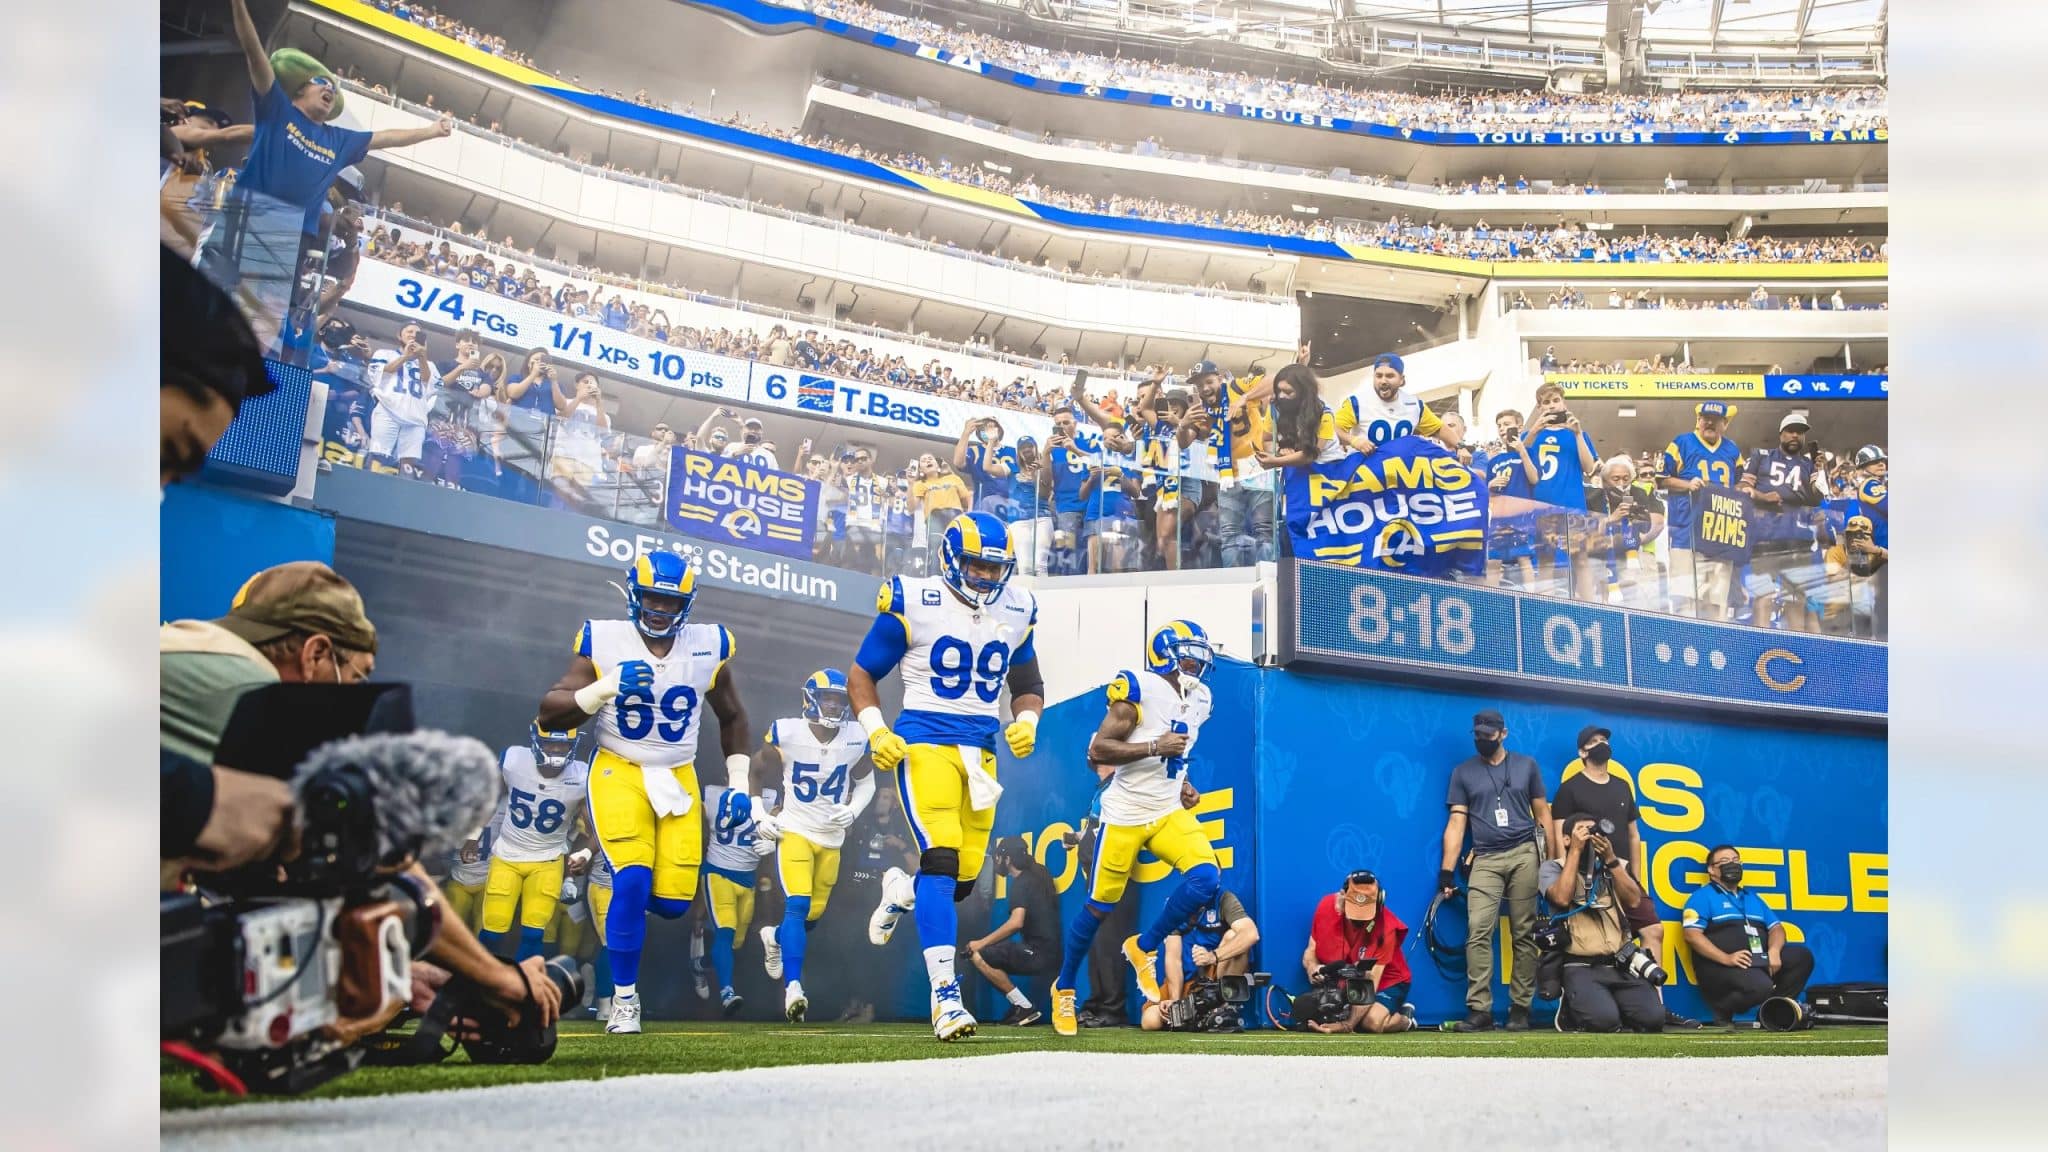 Los Angeles Rams Defense Runs Out Of The Tunnel At Sofi Stadium. Photo Credit: Jeff Lewis | LA Rams